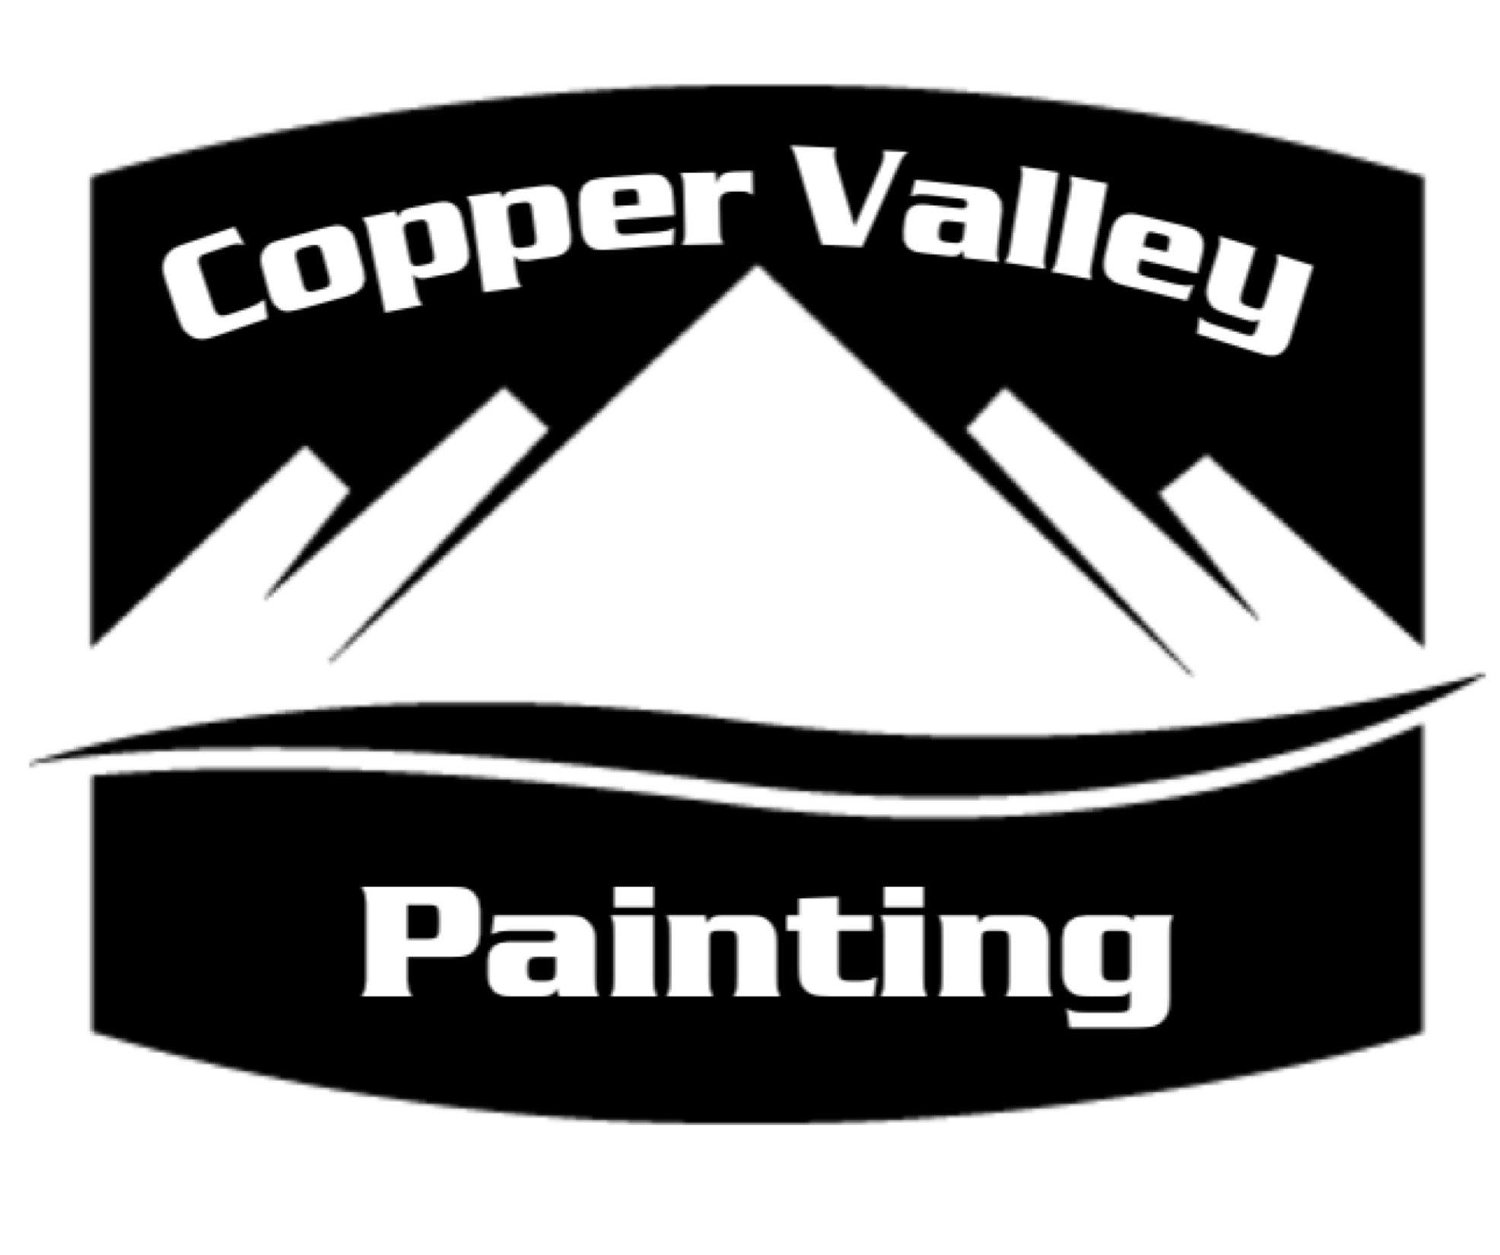 Copper Valley Painting